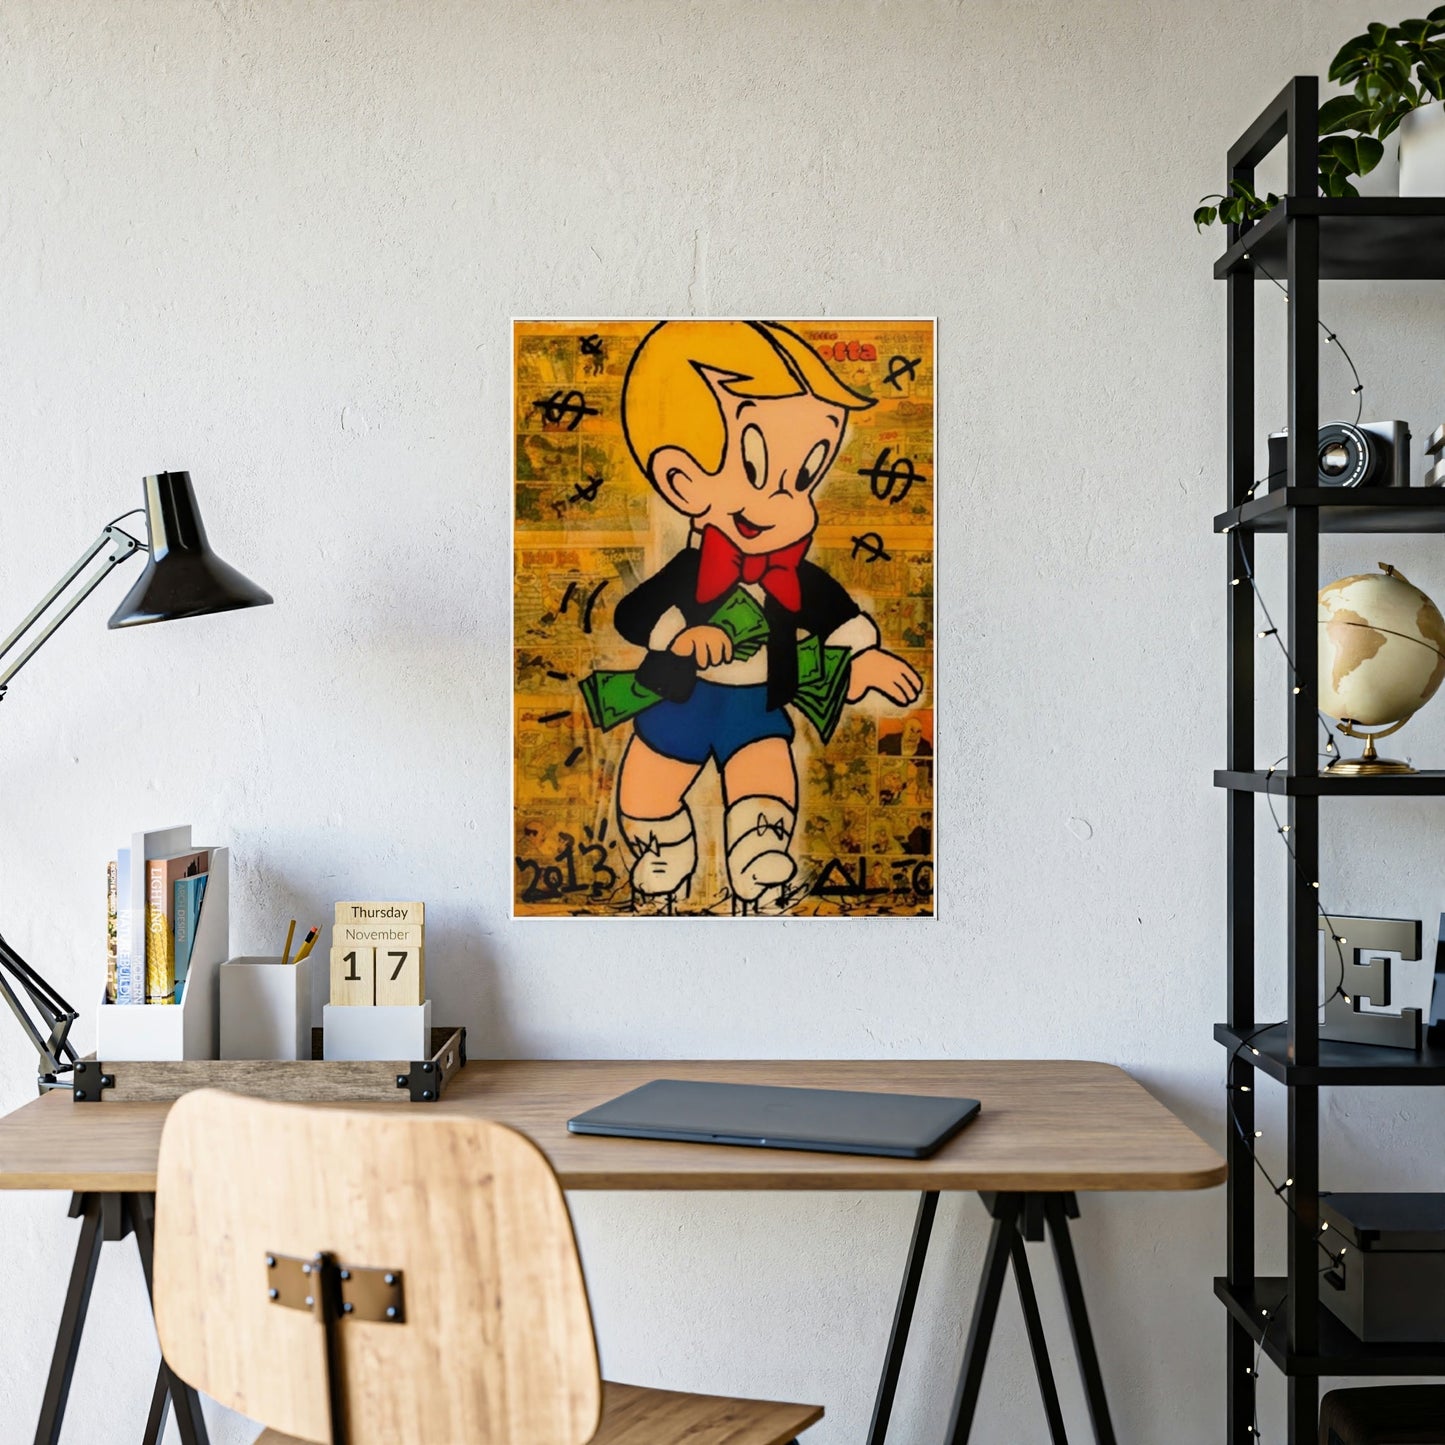 Bold Wall Art: Alec Monopoly's Print on Canvas and Framed Posters